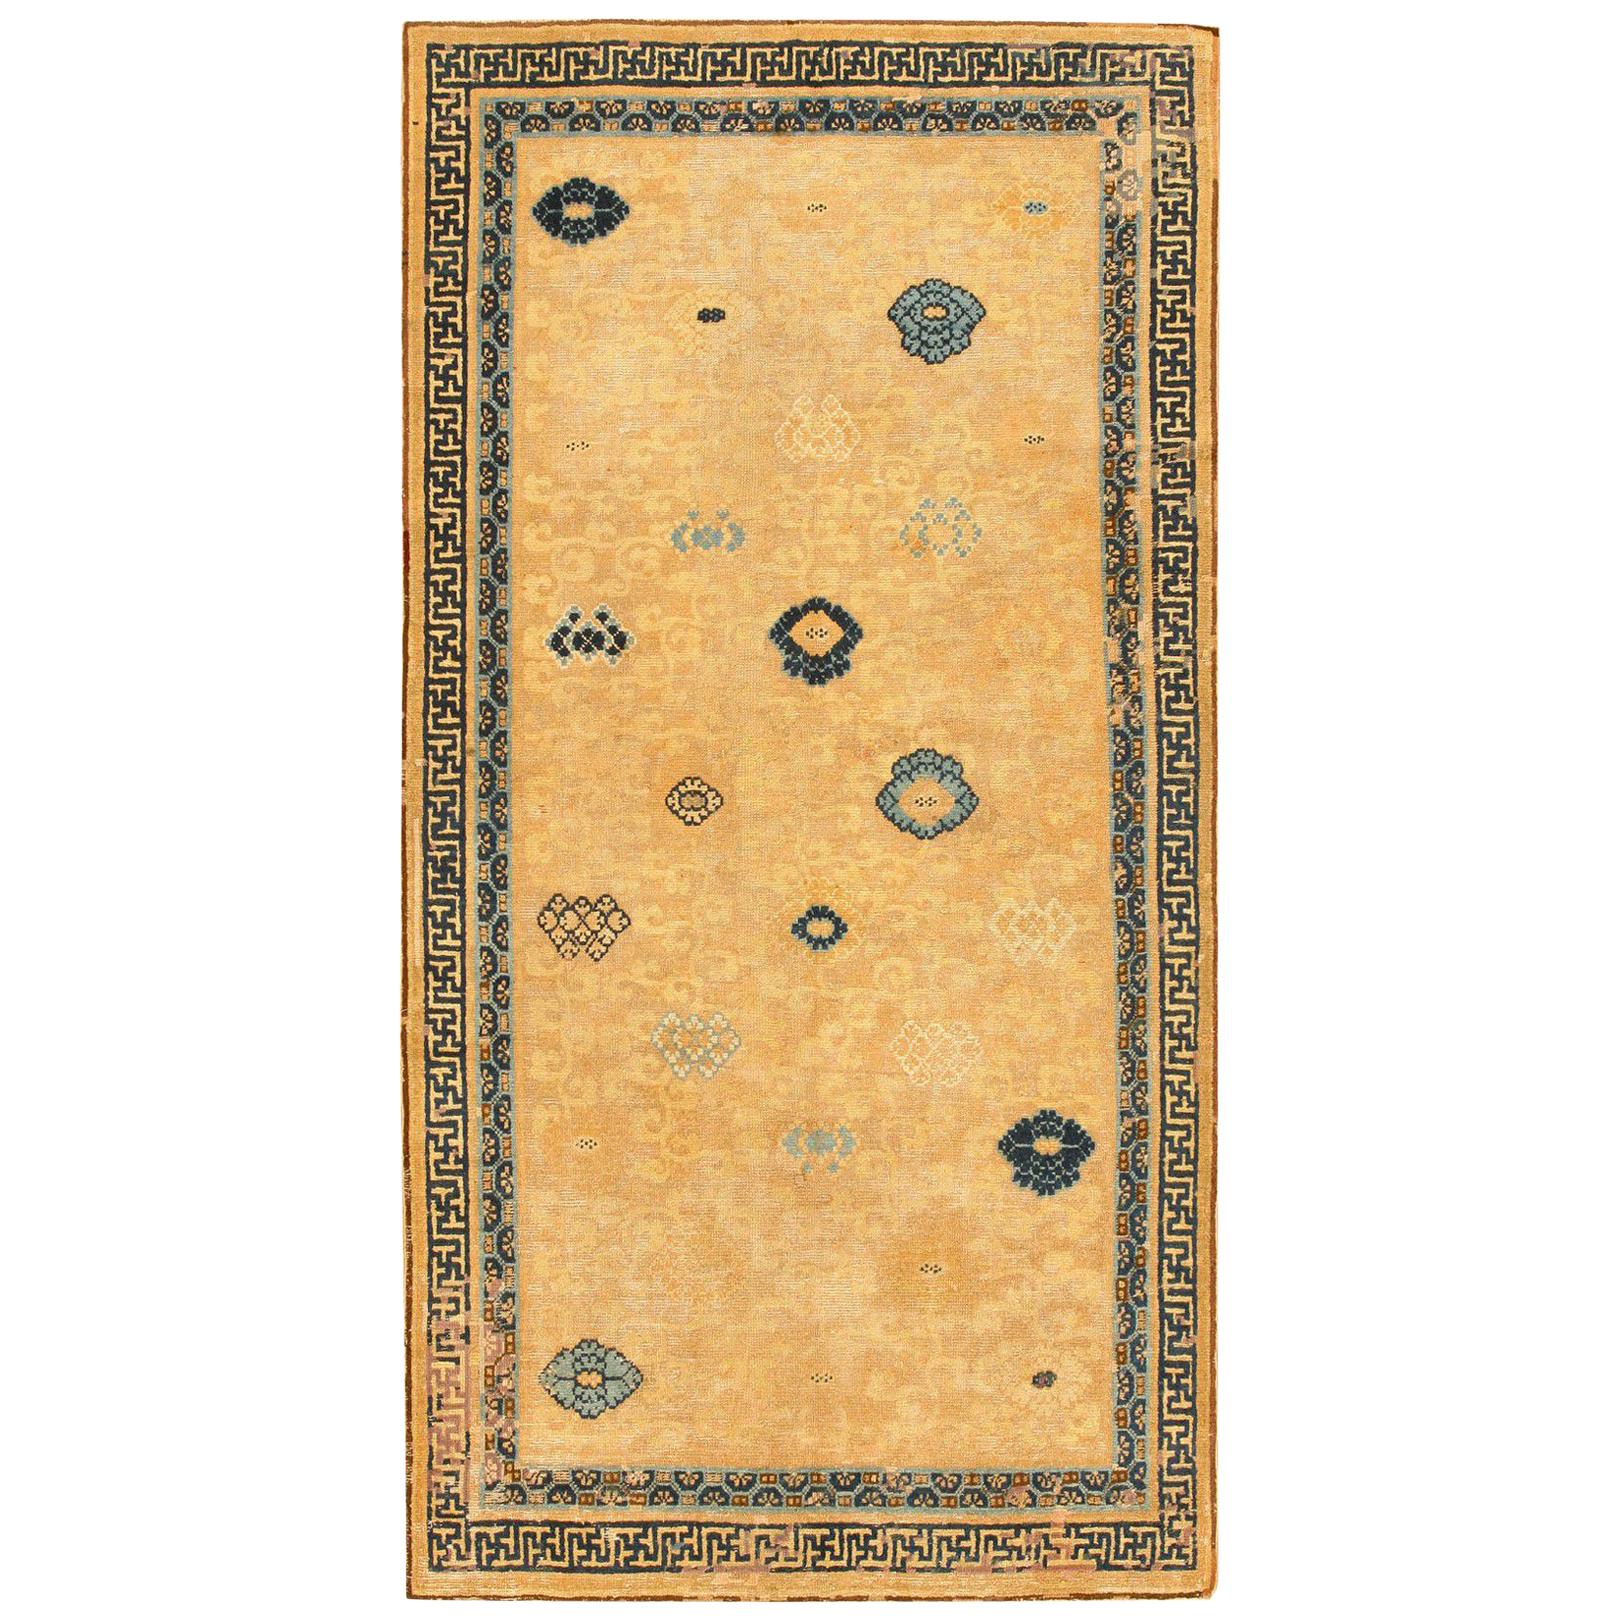 Nazmiyal Antique 17th Century Chinese Ningsia Rug. Size: 4 ft 7 in x 9 ft 